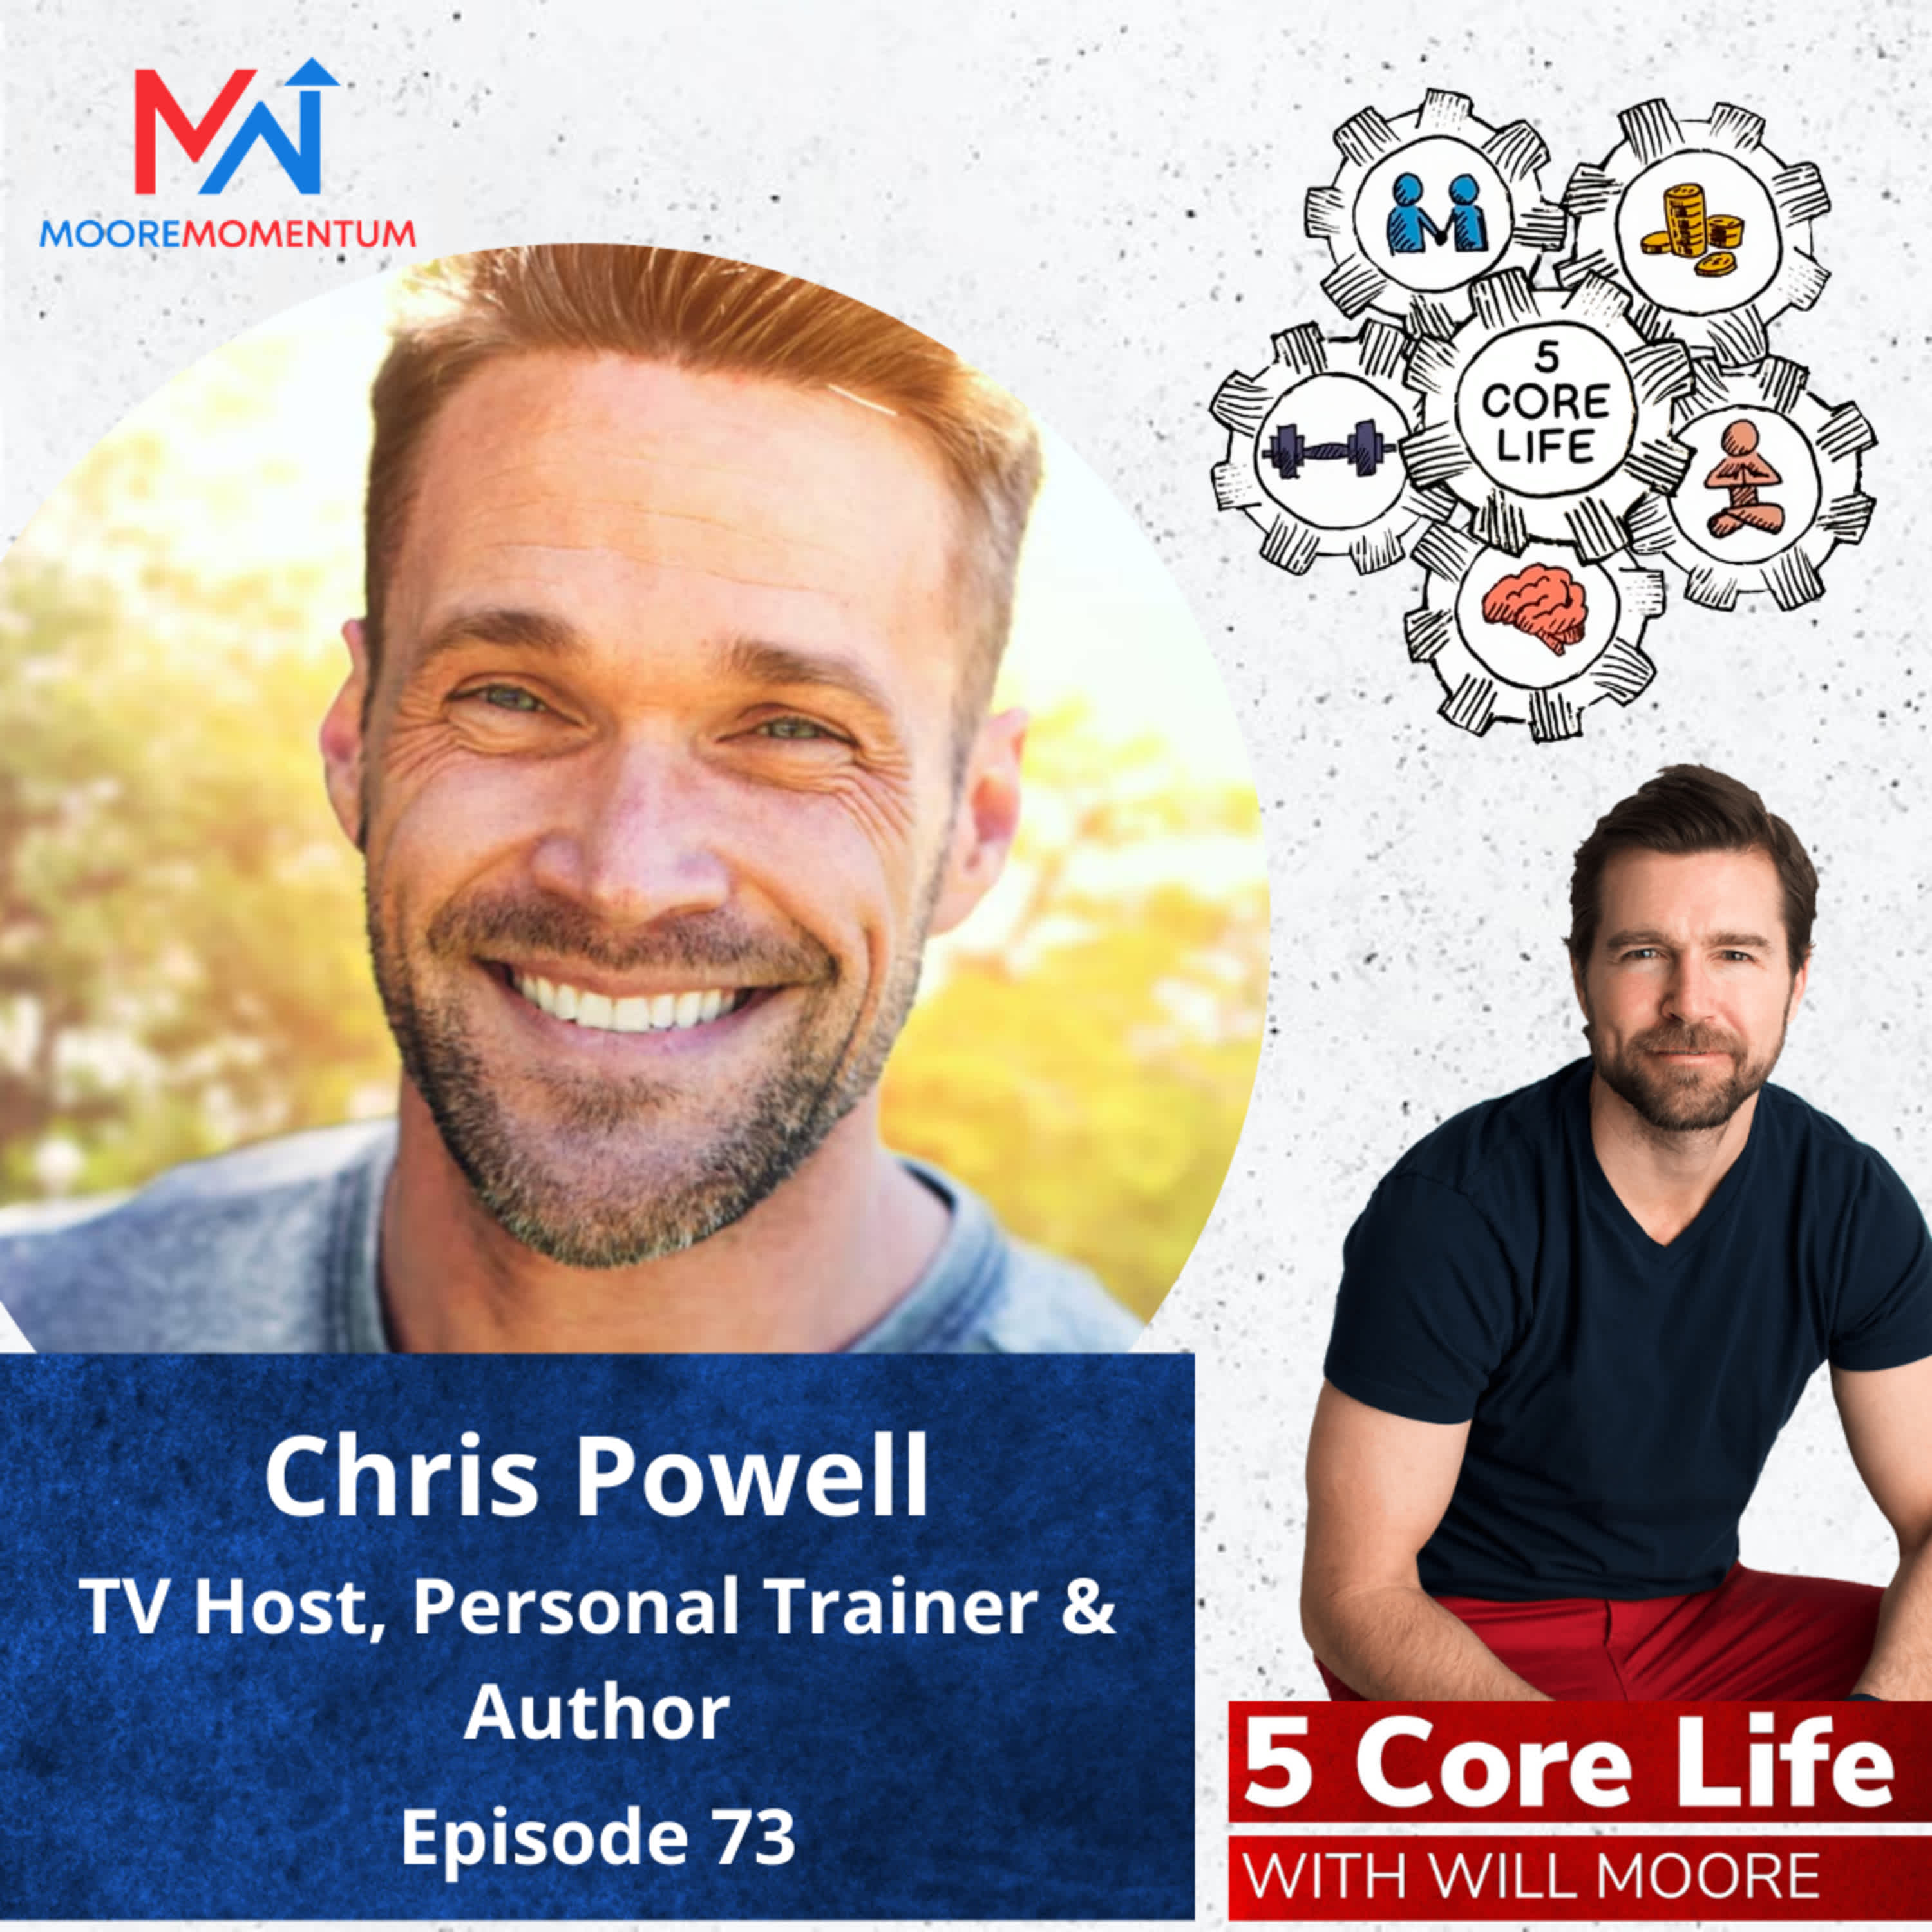 Be Selfish Through Giving Back, Chris Powell host of worldwide hit show “Extreme Weight Loss” & New York Times Best Seller